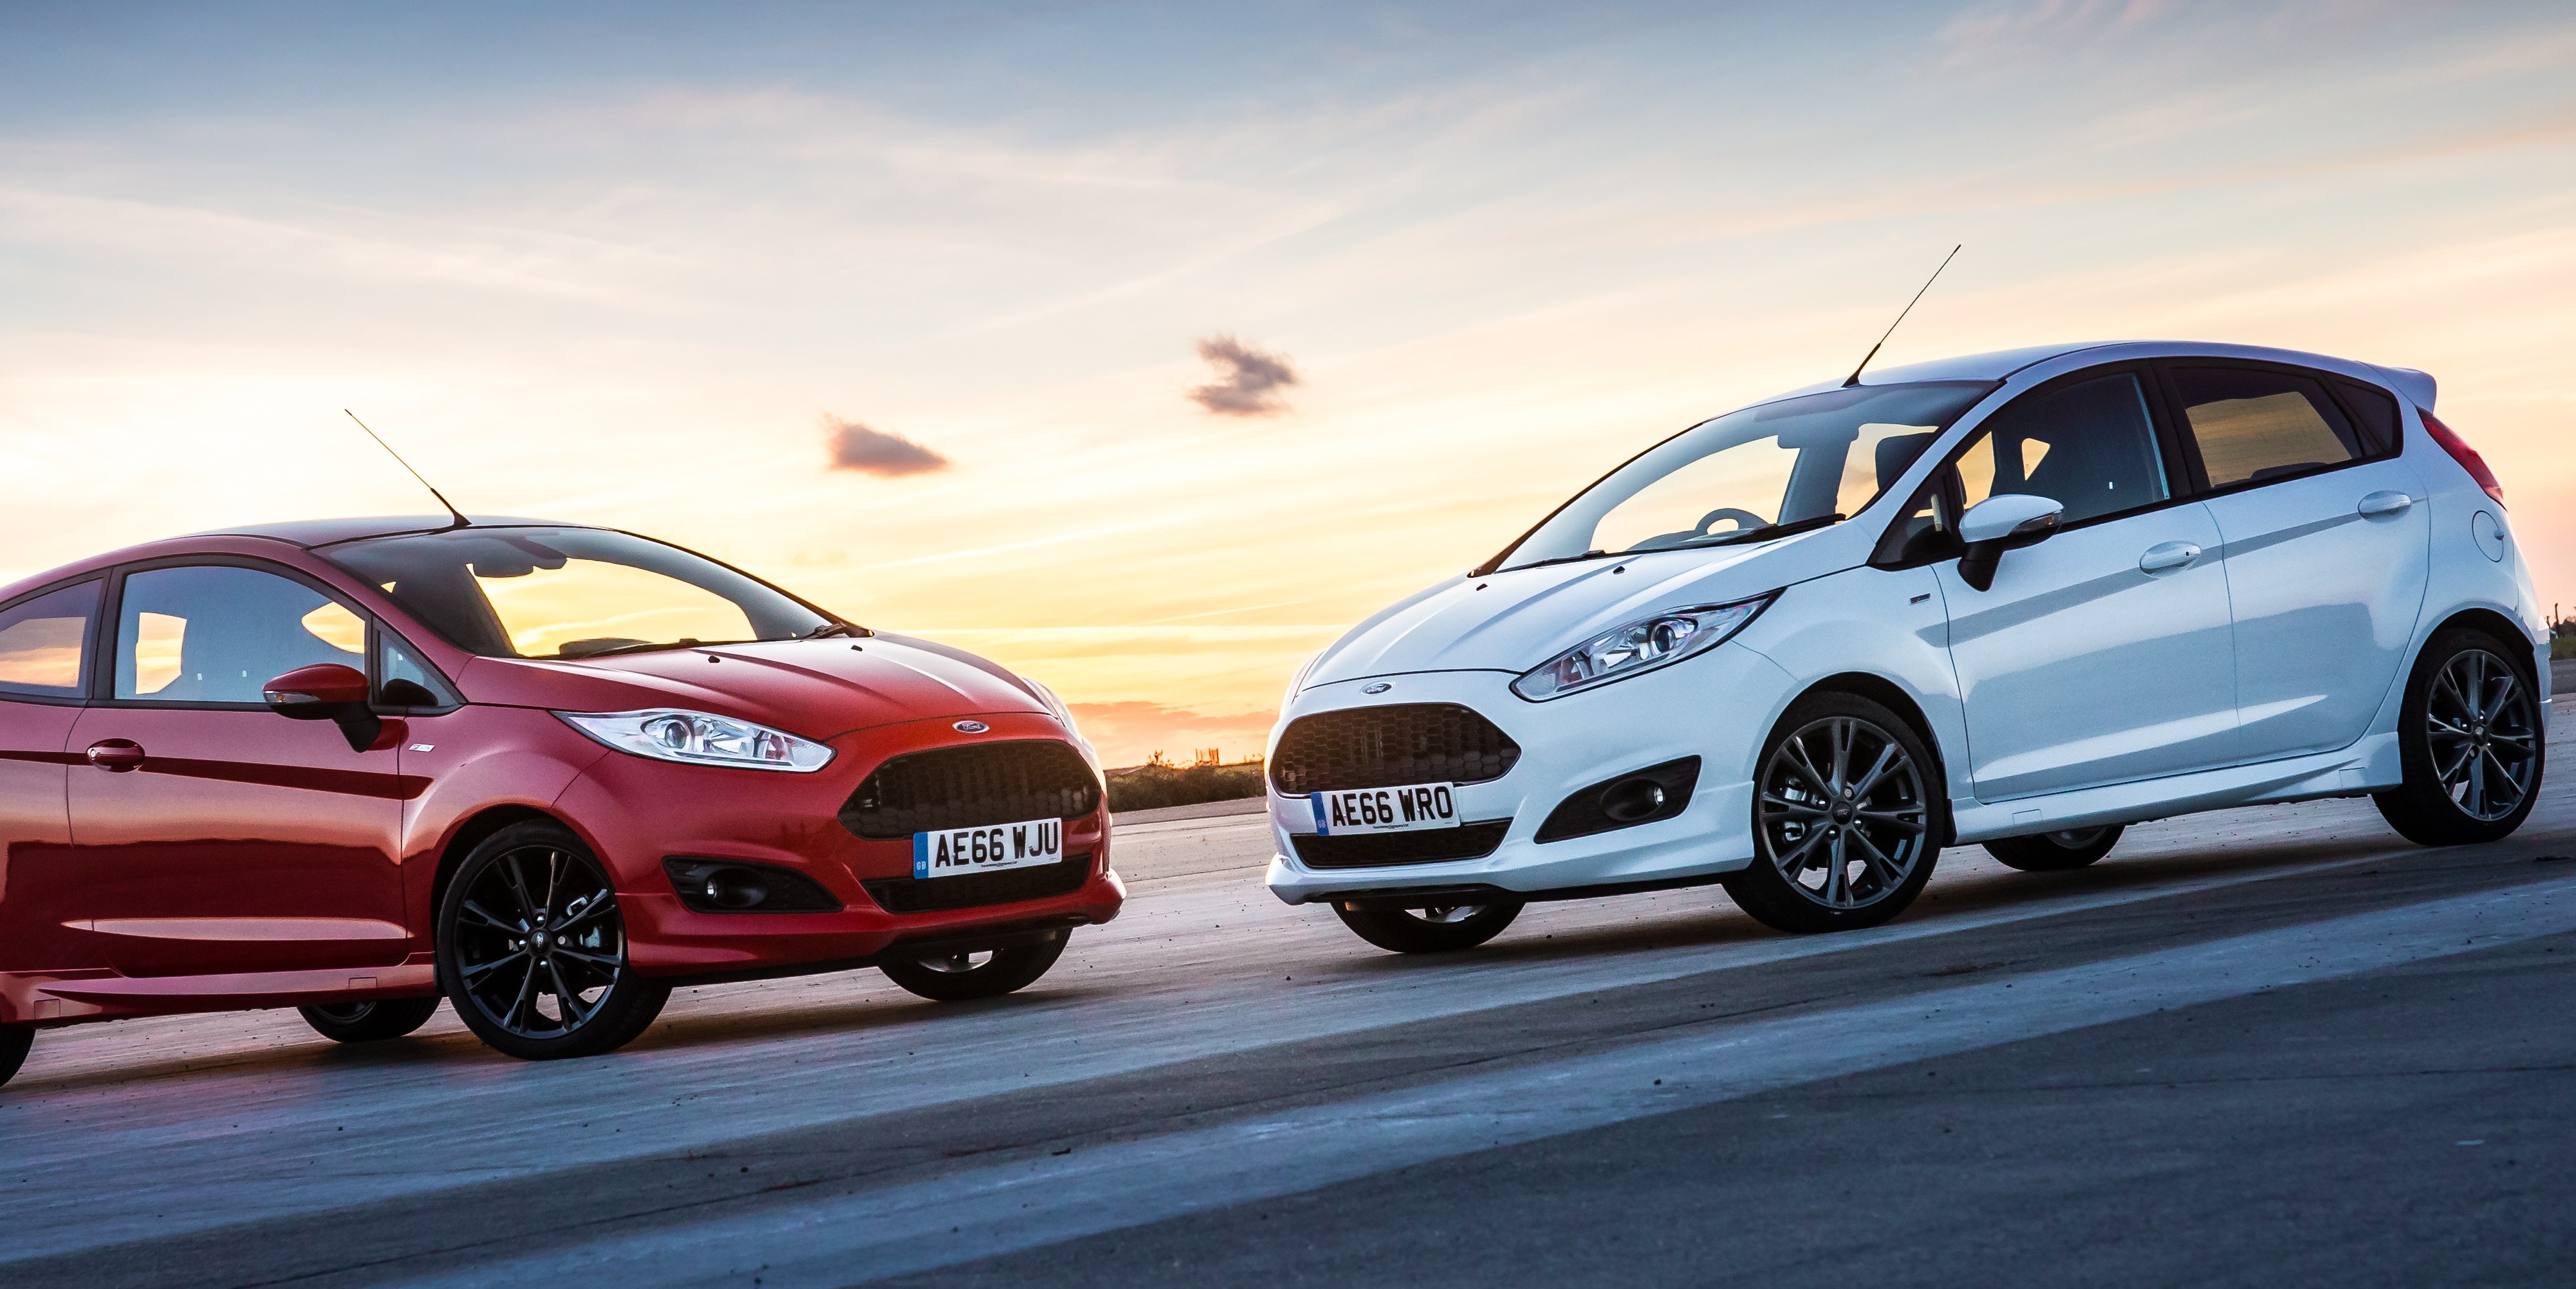 Red Ford Fiesta on left and white Ford Fiesta on right, nose to nose, with sunset in background